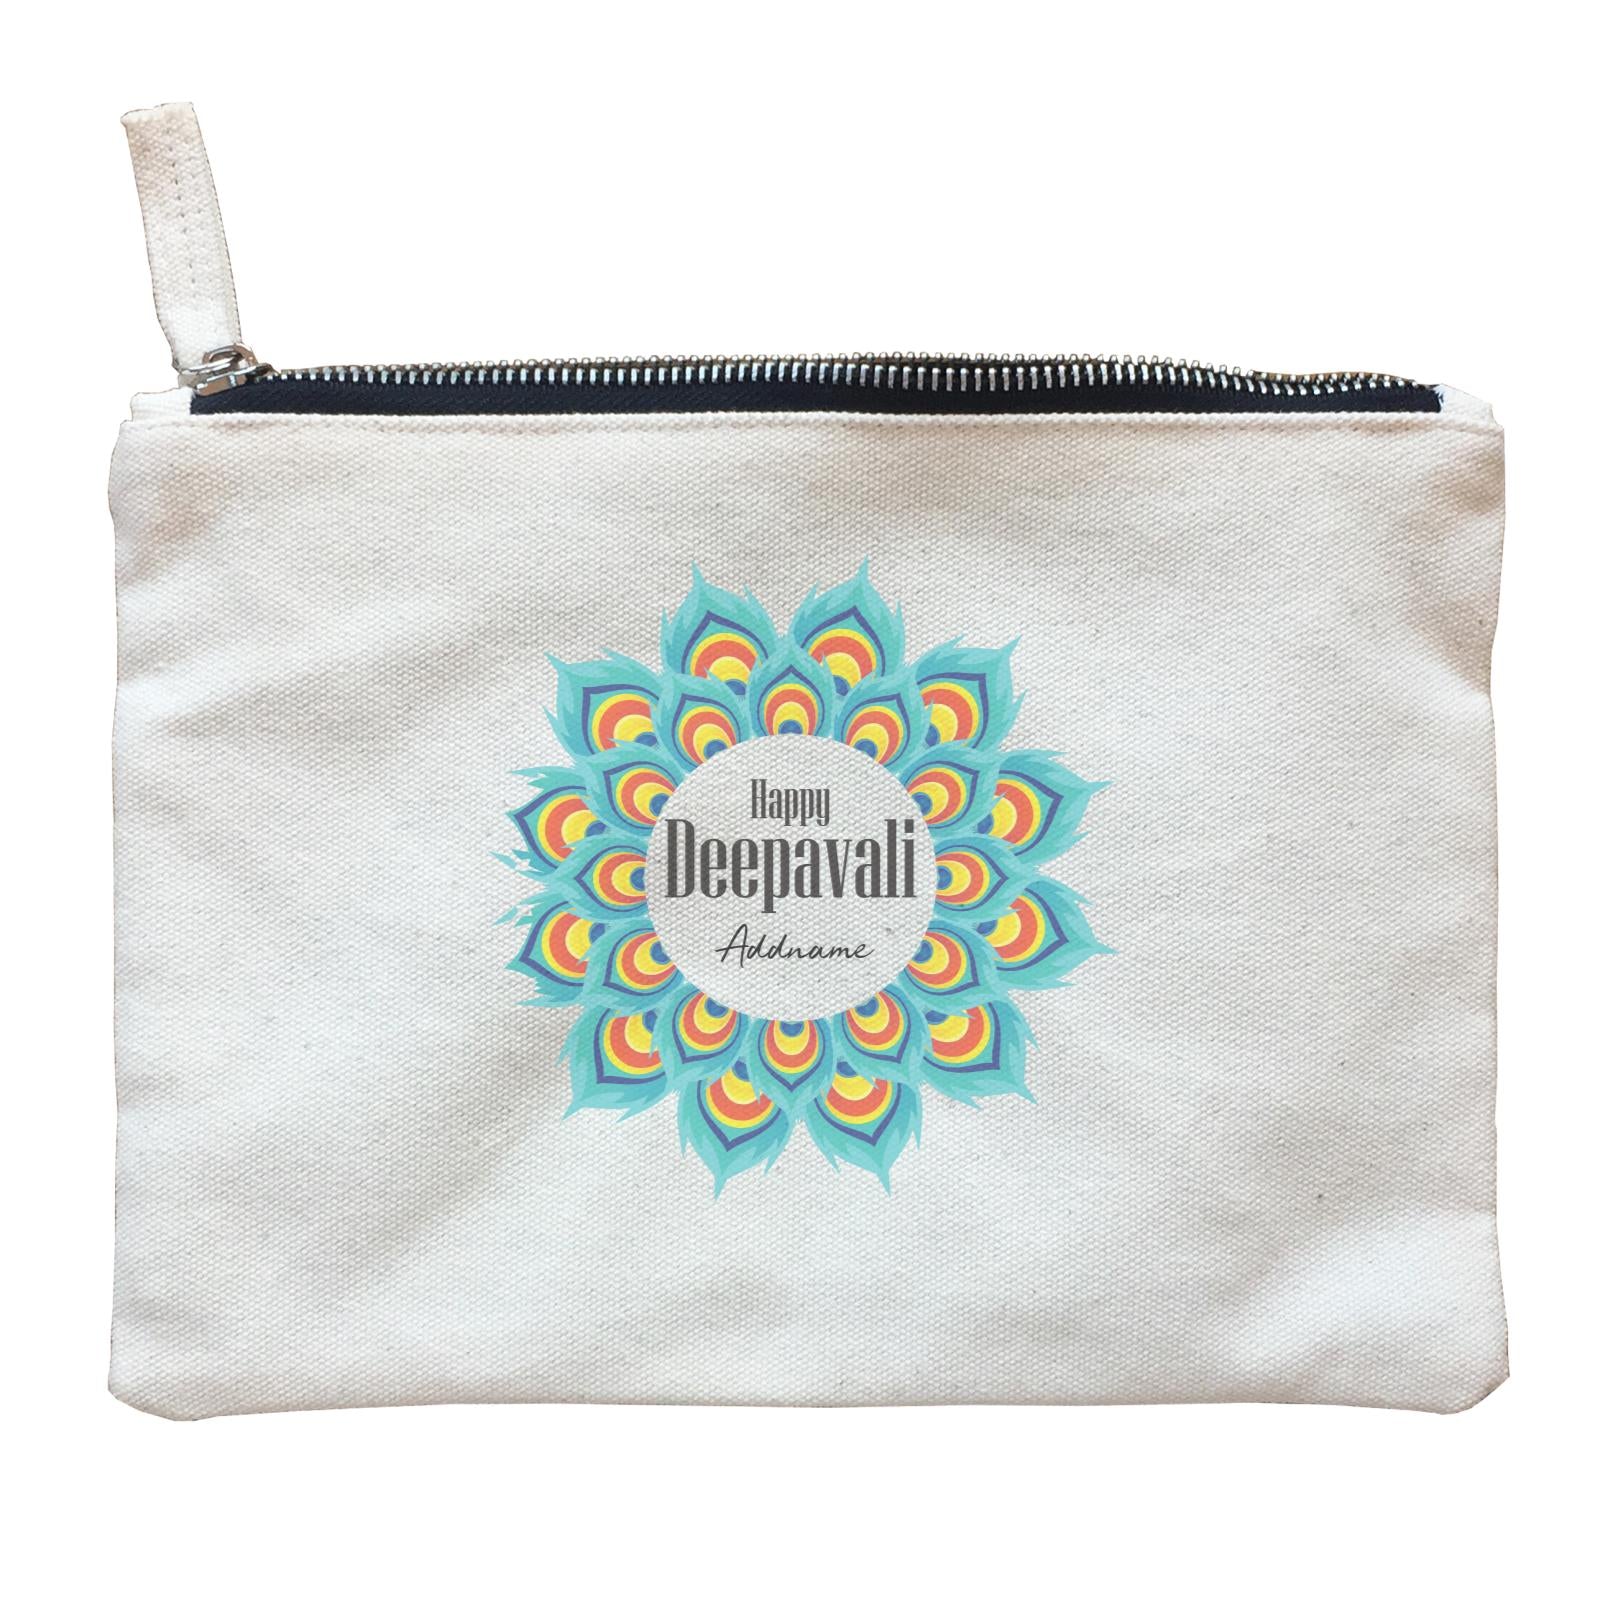 Deepavali Peacock Feather Mandala Greetings Addname Zipper Pouch